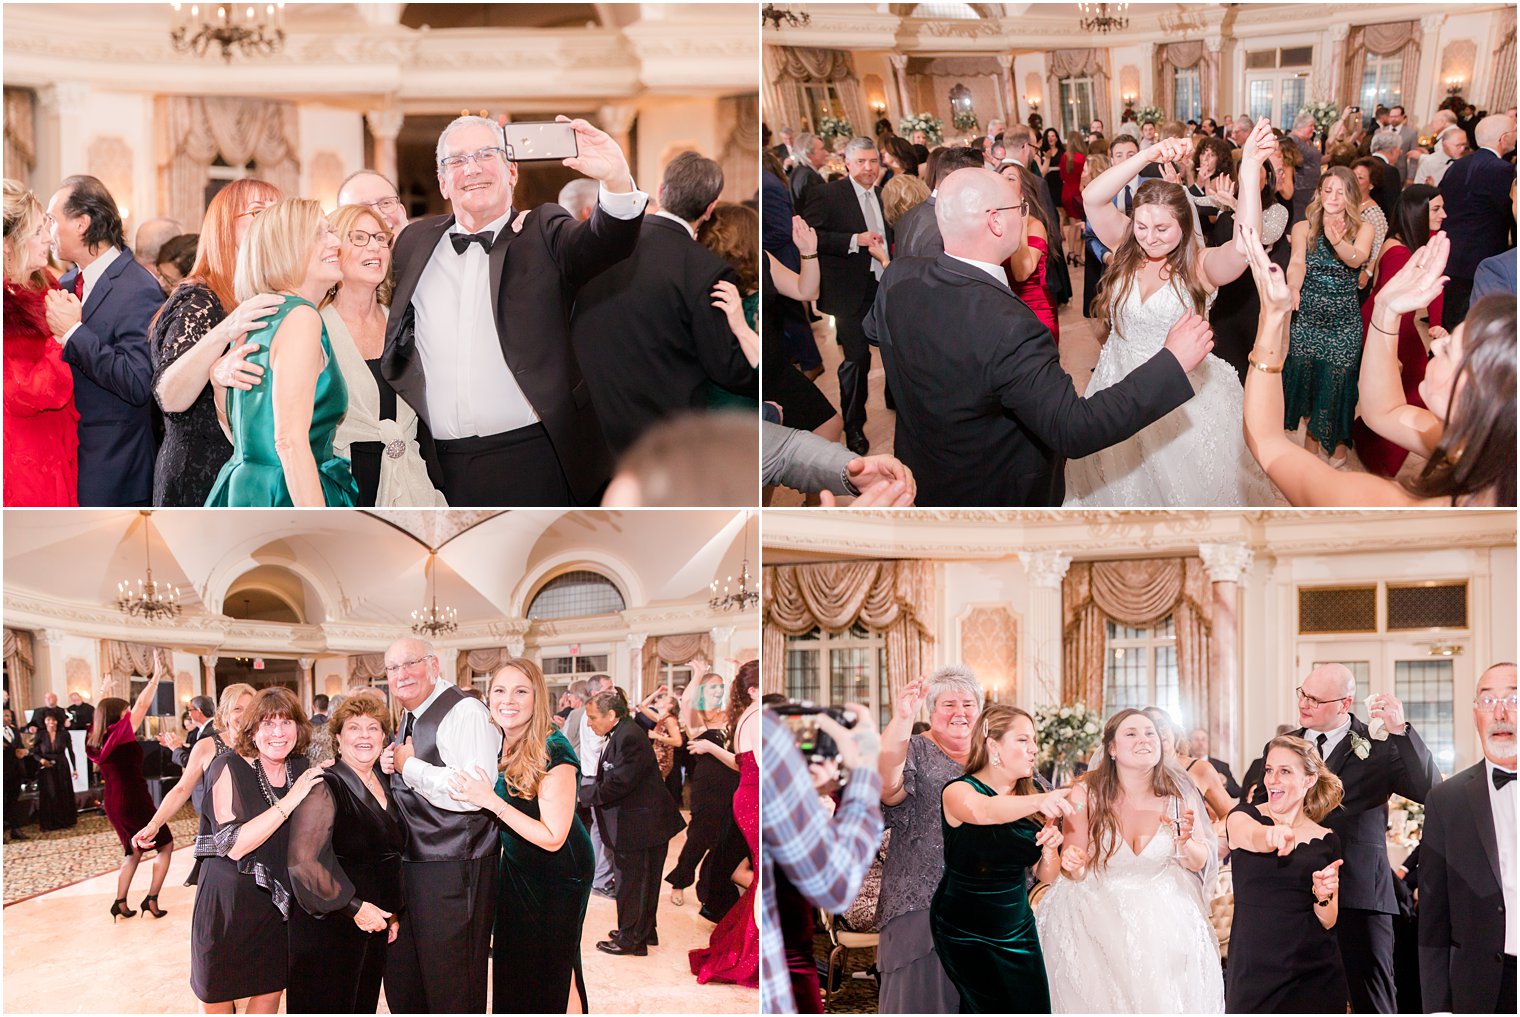 guests dancing at wedding reception at Pleasantdale Chateau